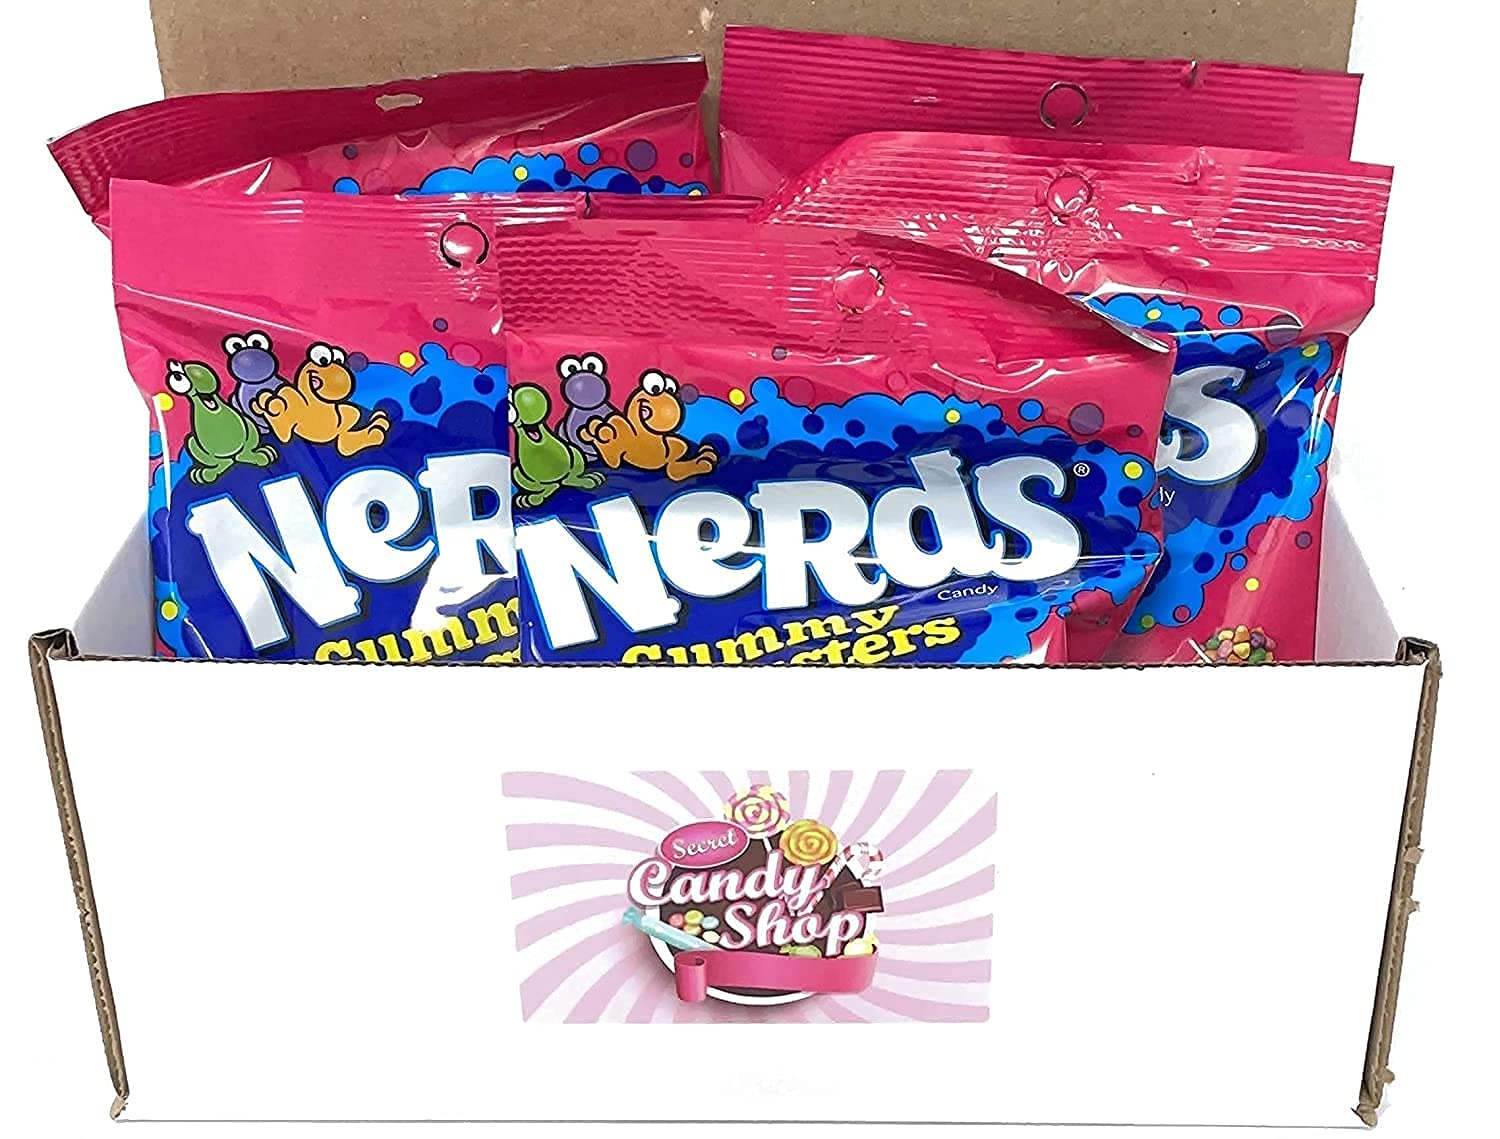 Nerds Candy Variety pack of 3 candies (Gummy Clusters, Big Chewy, Sour –  Secret Candy Shop